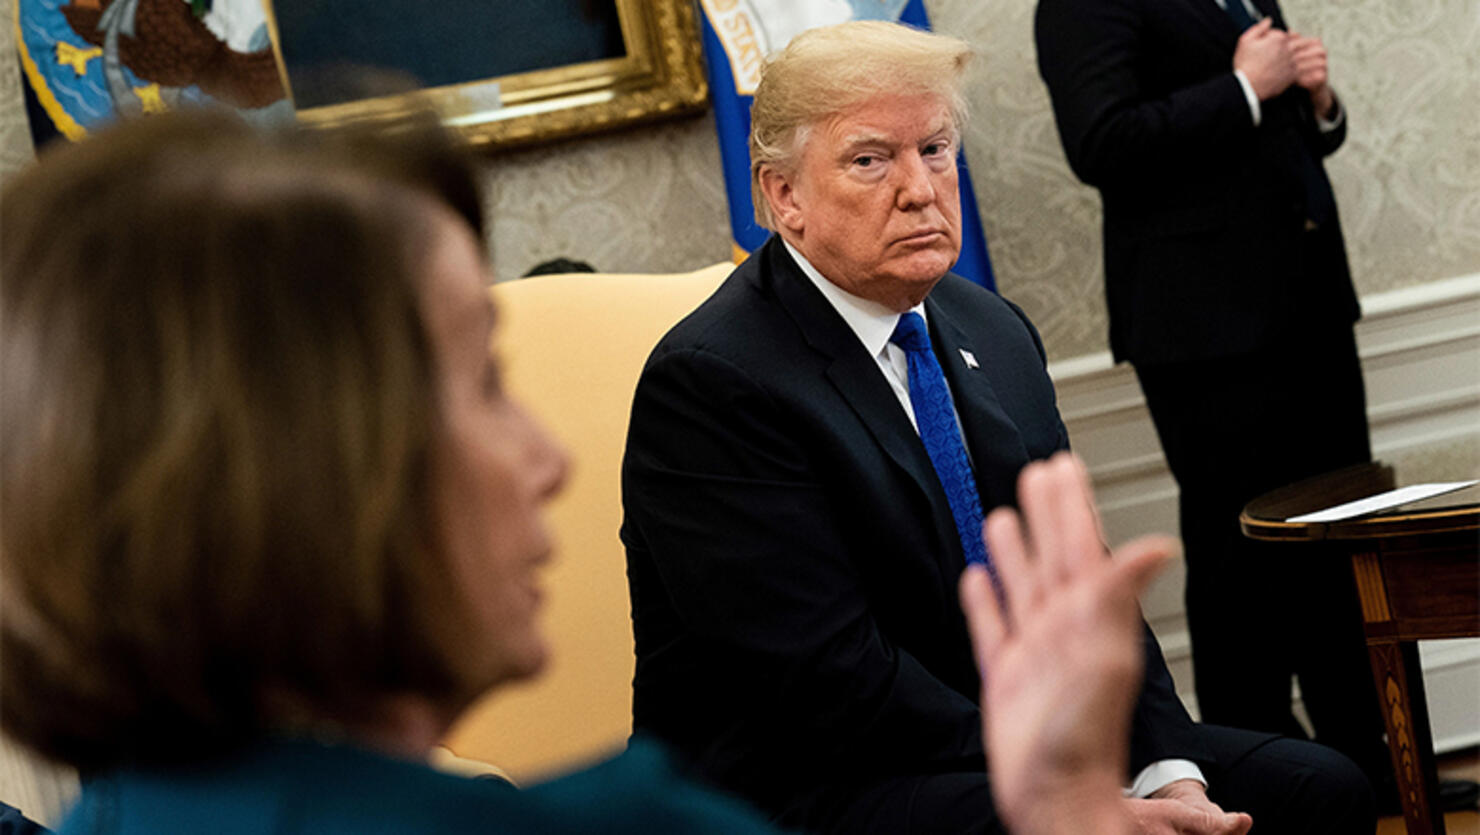 US President Donald Trump (R) listens while presumptive Speaker, House Minority Leader Nancy Pelosi (D-CA) makes a statement to the press before a meeting at the White House December 11, 2018 in Washington, DC